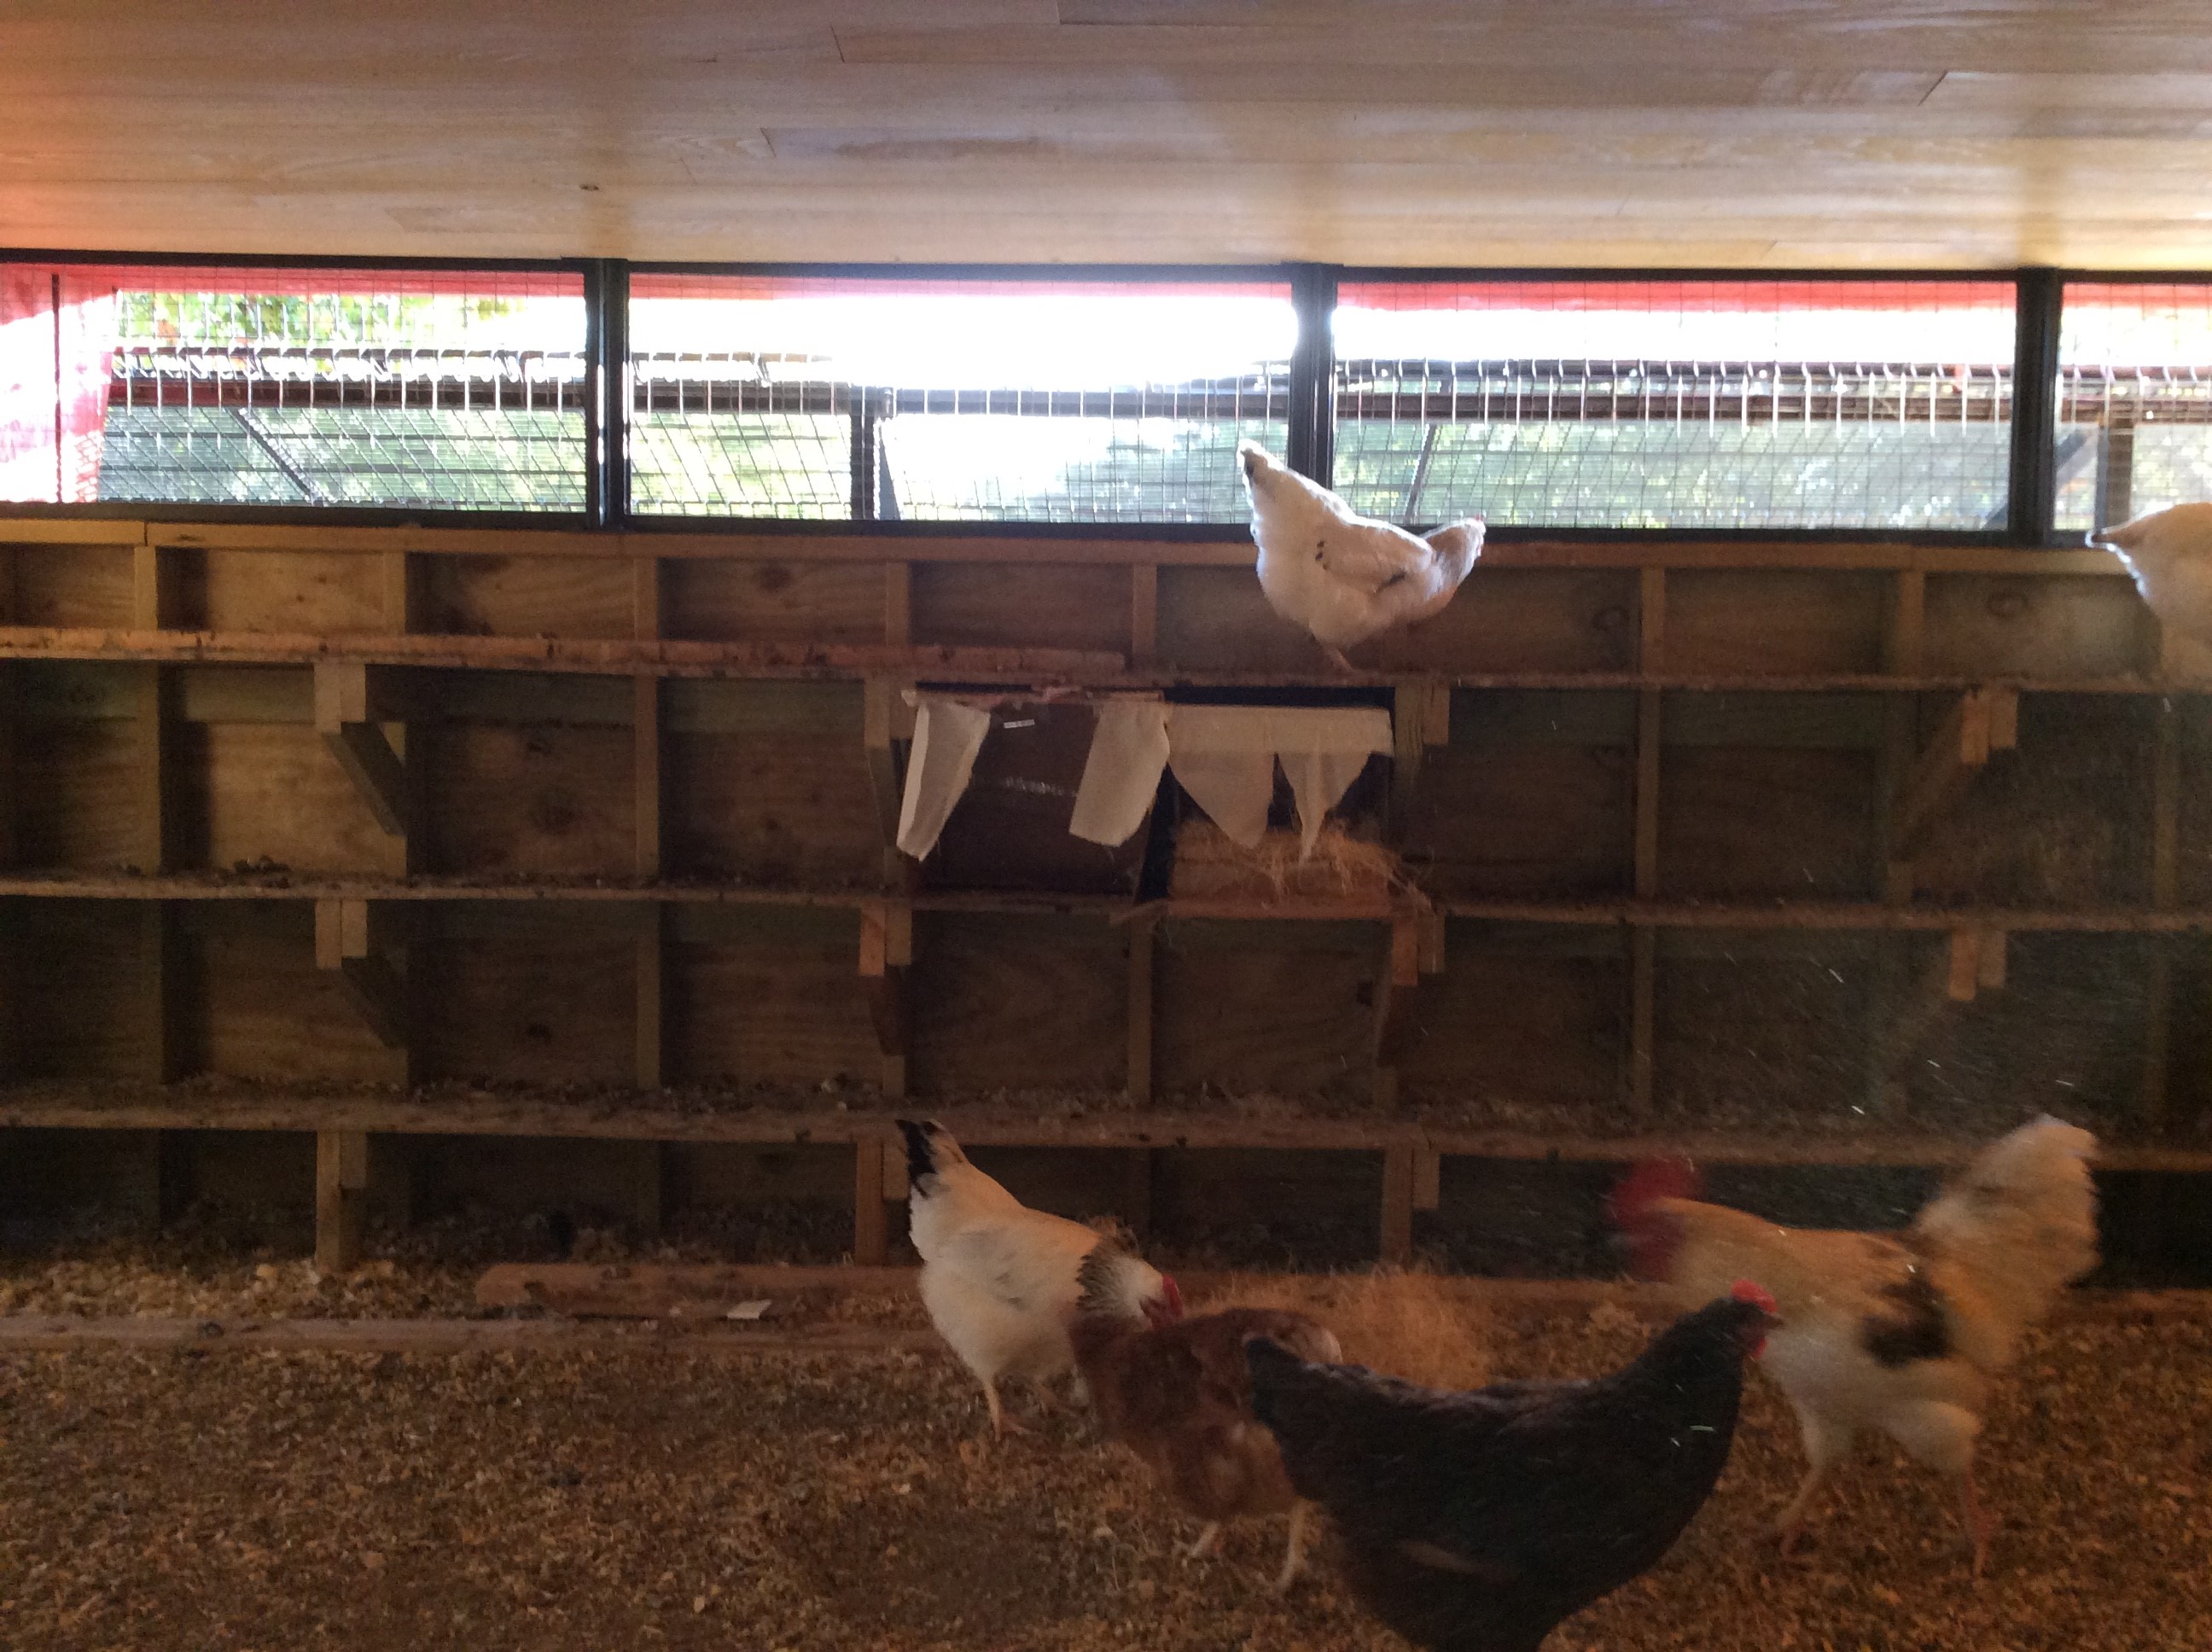 Prototype nesting boxes were placed in the henhouse for testing.